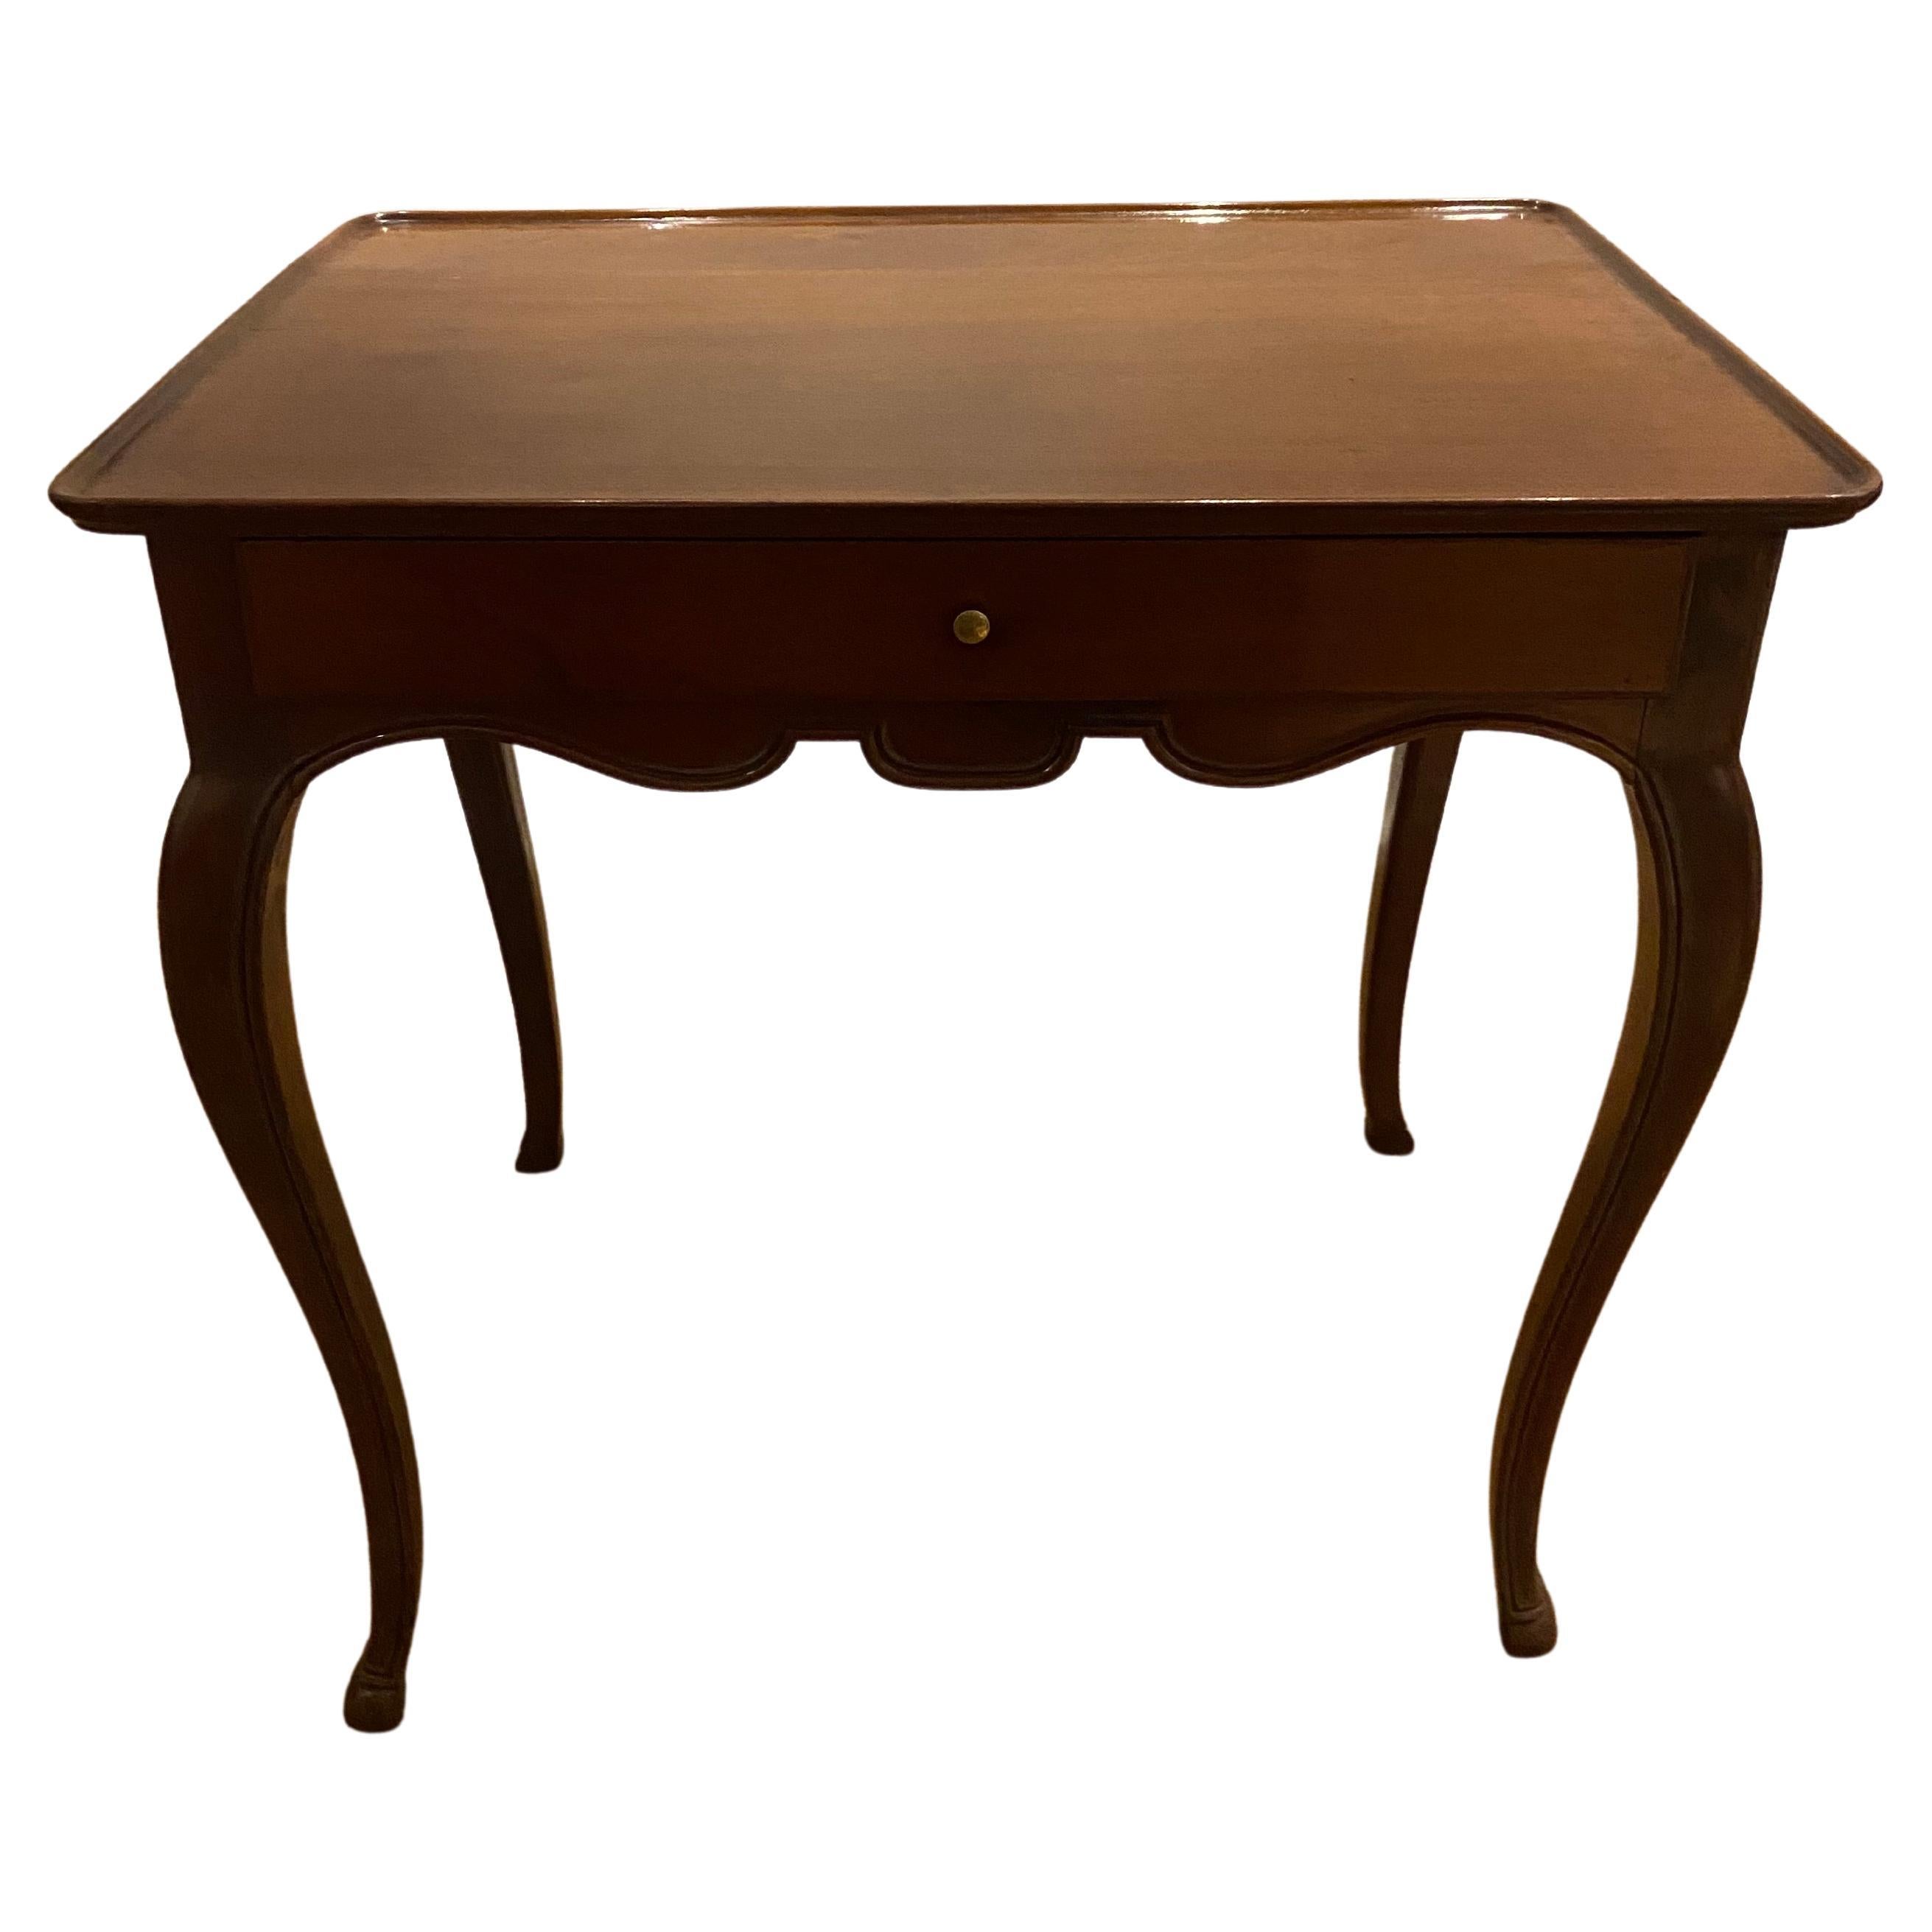 French Provincial Mahogany Table, 'Mid-18th Century' For Sale